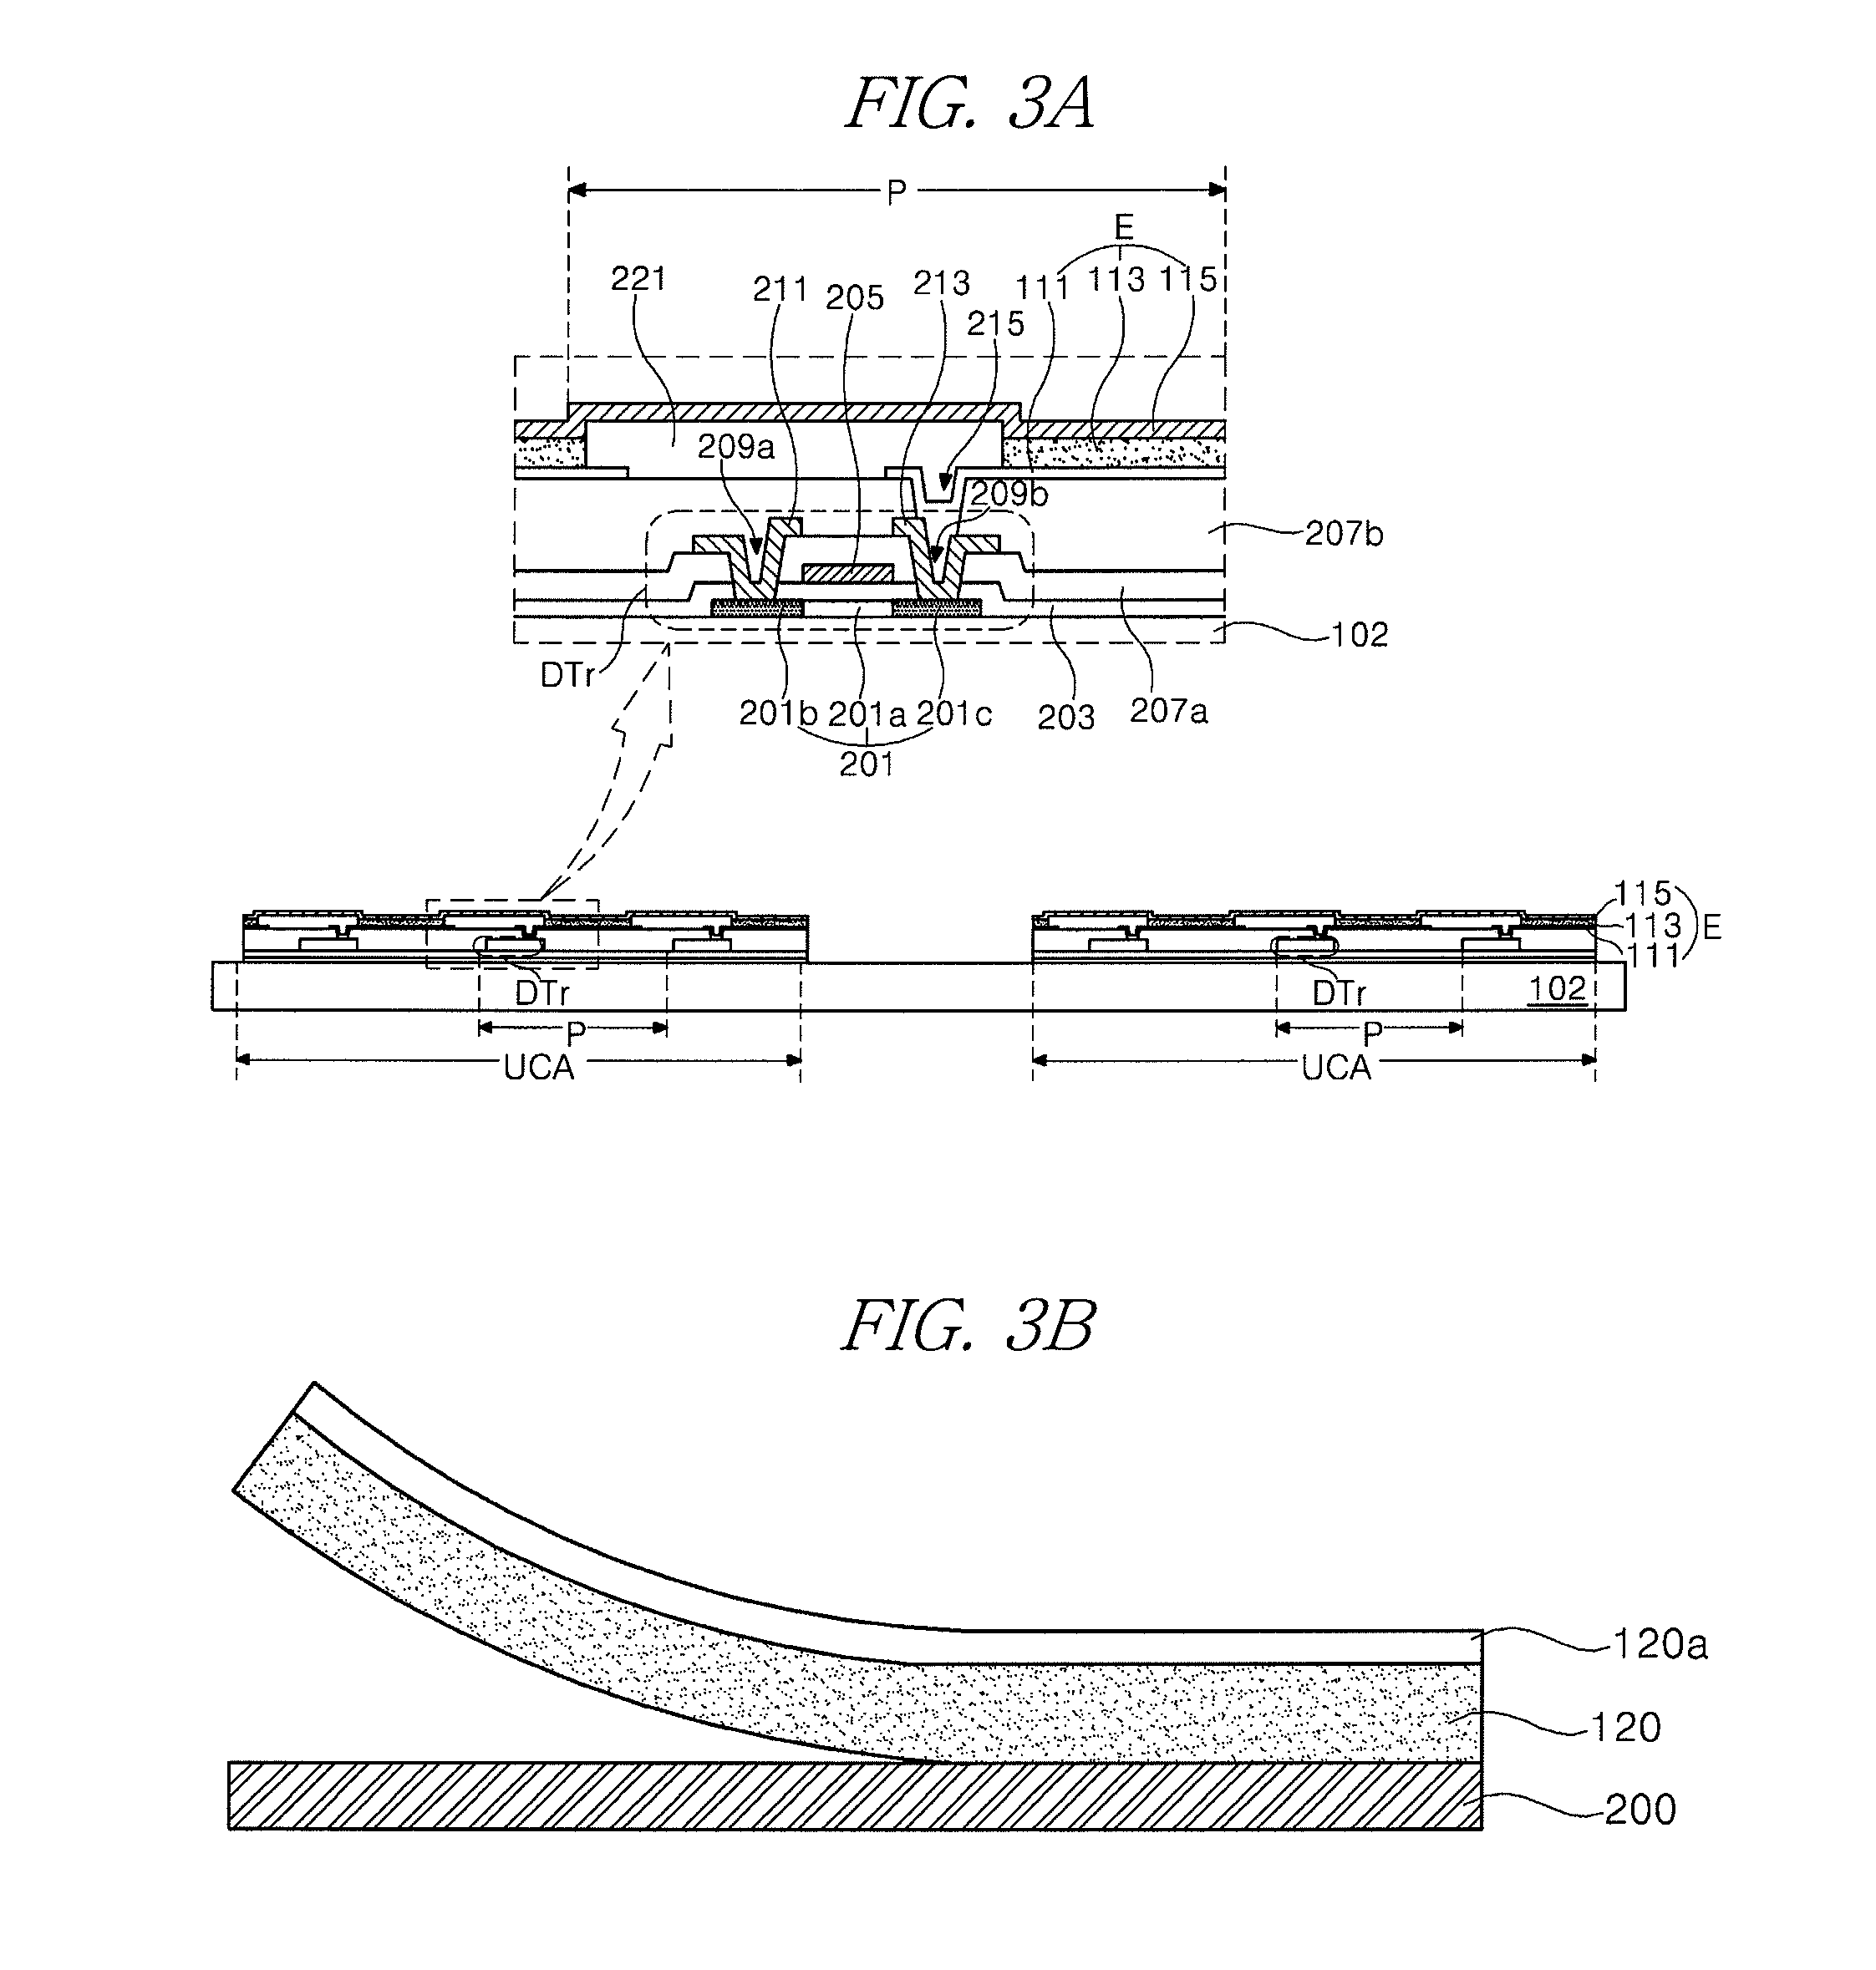 Organic electroluminescent display device and method of fabricating the same